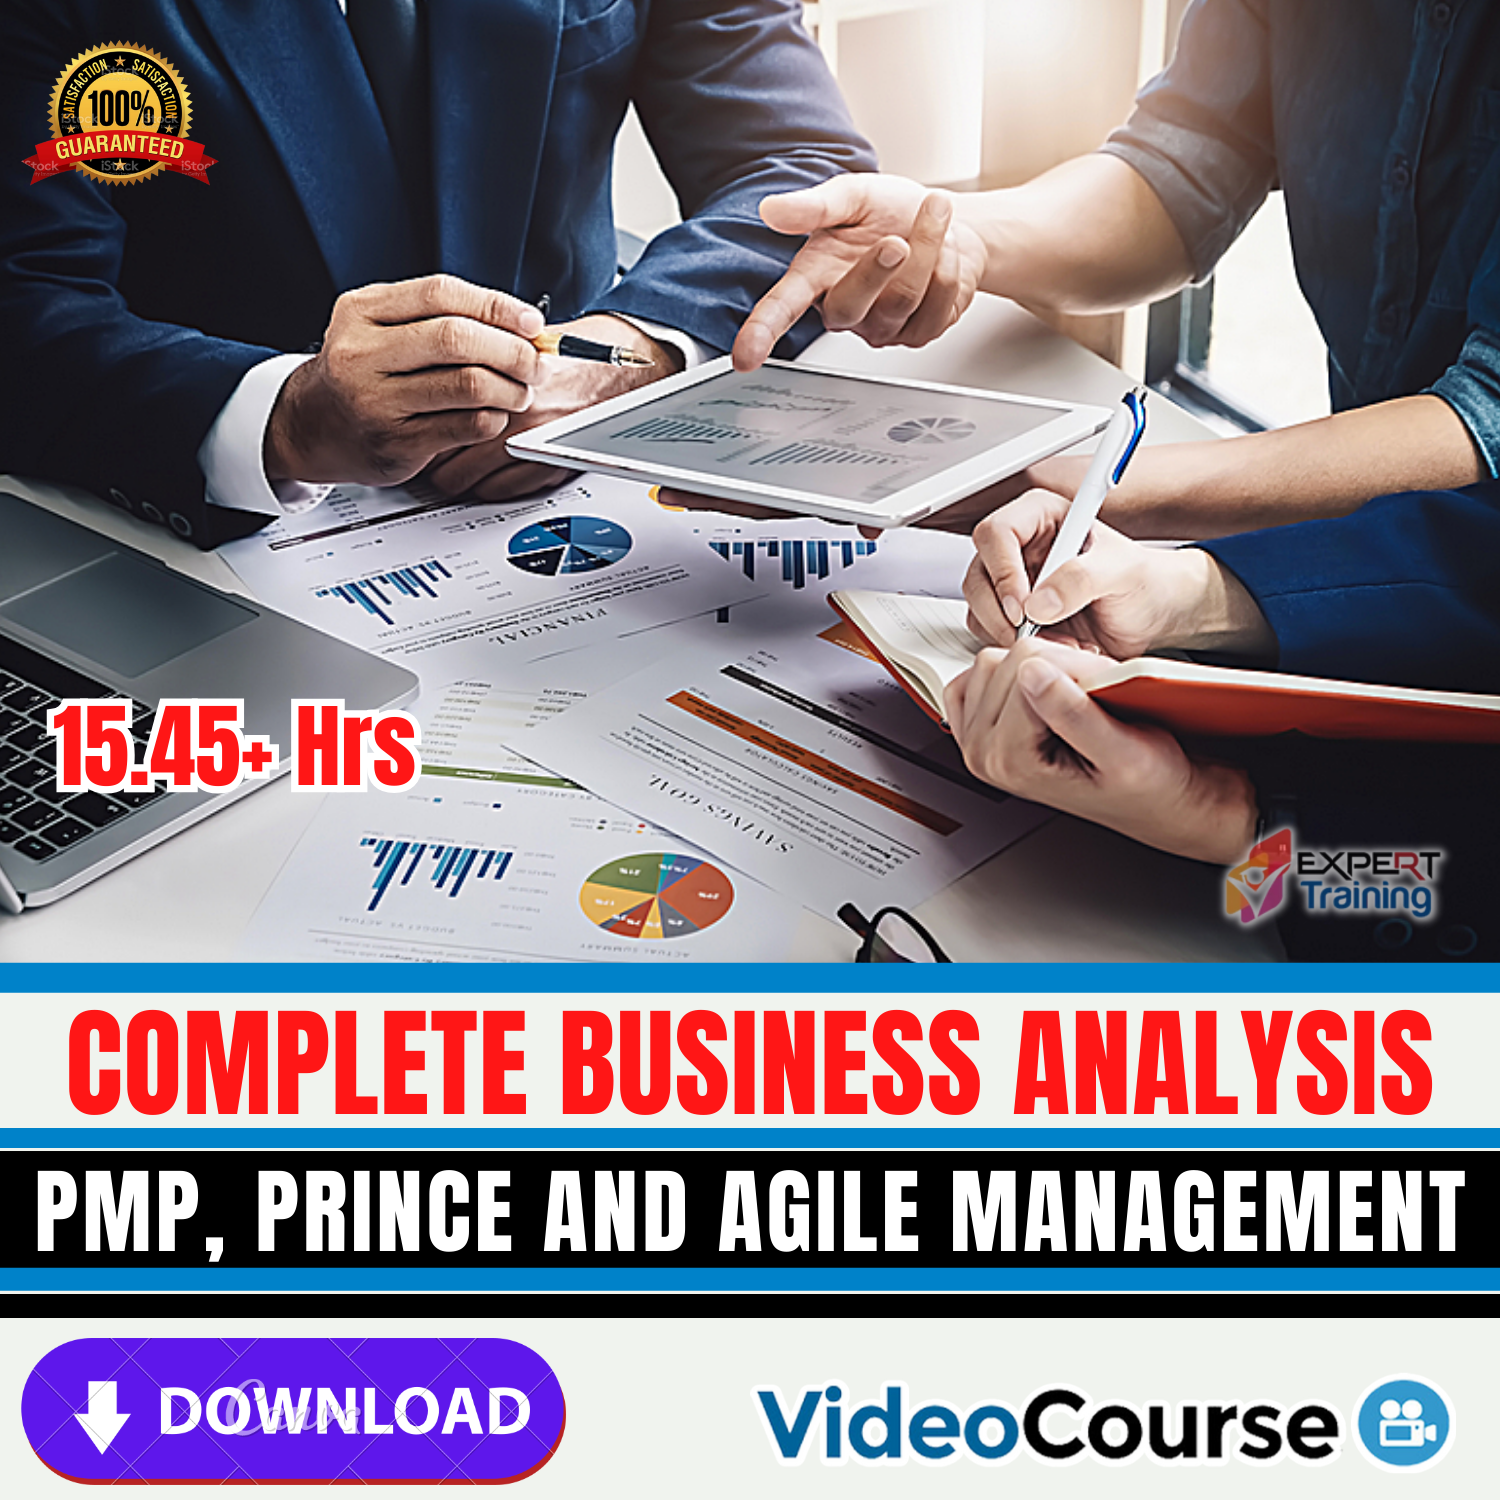 Complete Business Analysis, PMP, Prince and Agile Management